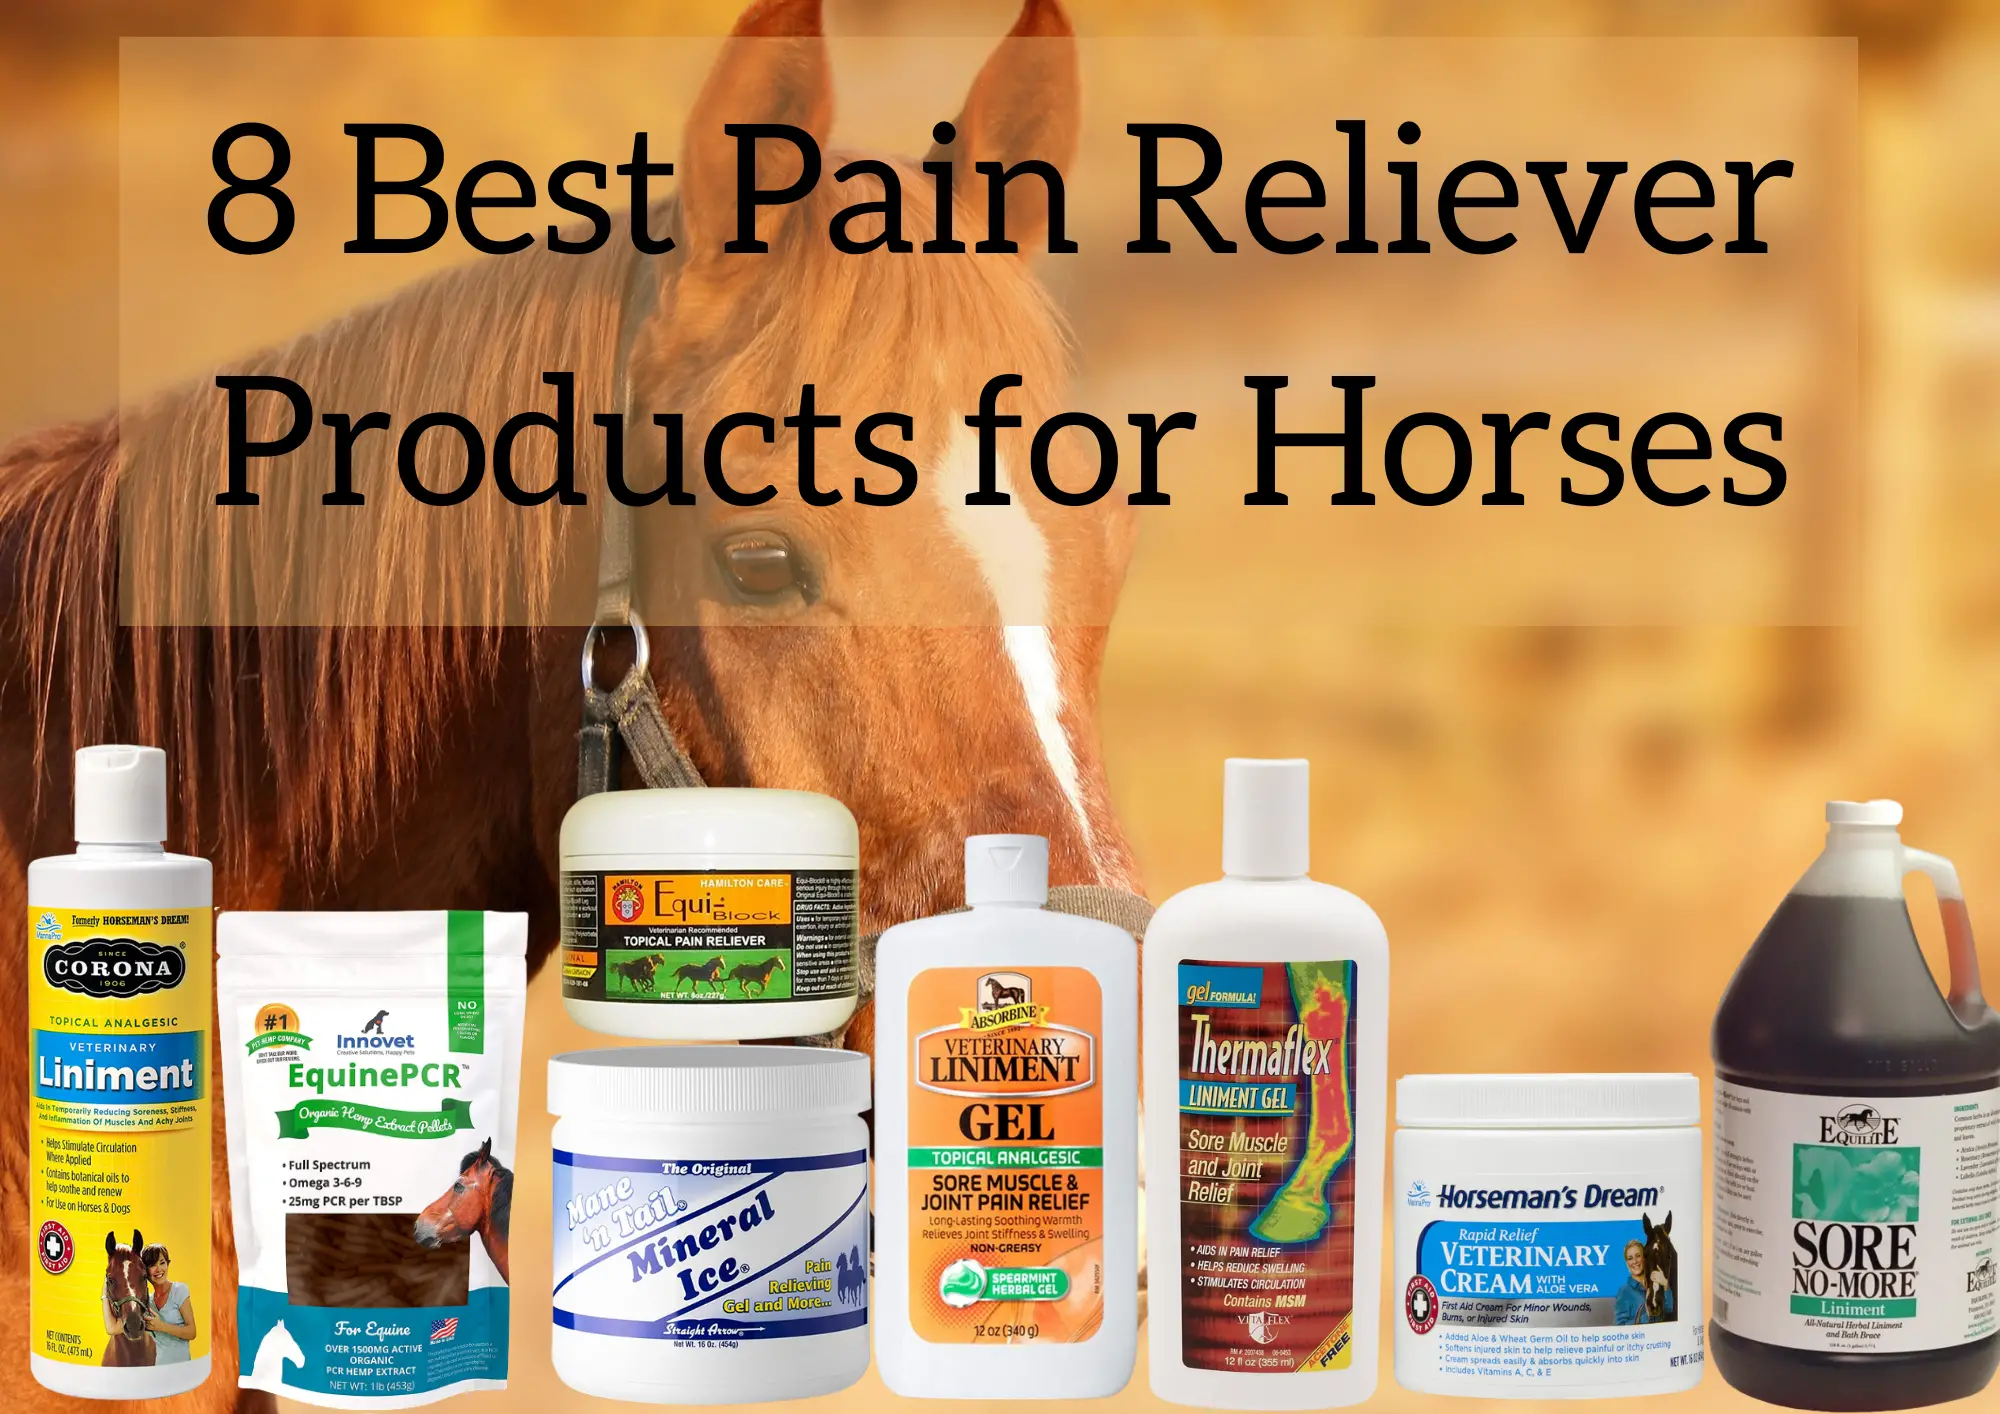 Best Pain Reliever Products for Horses